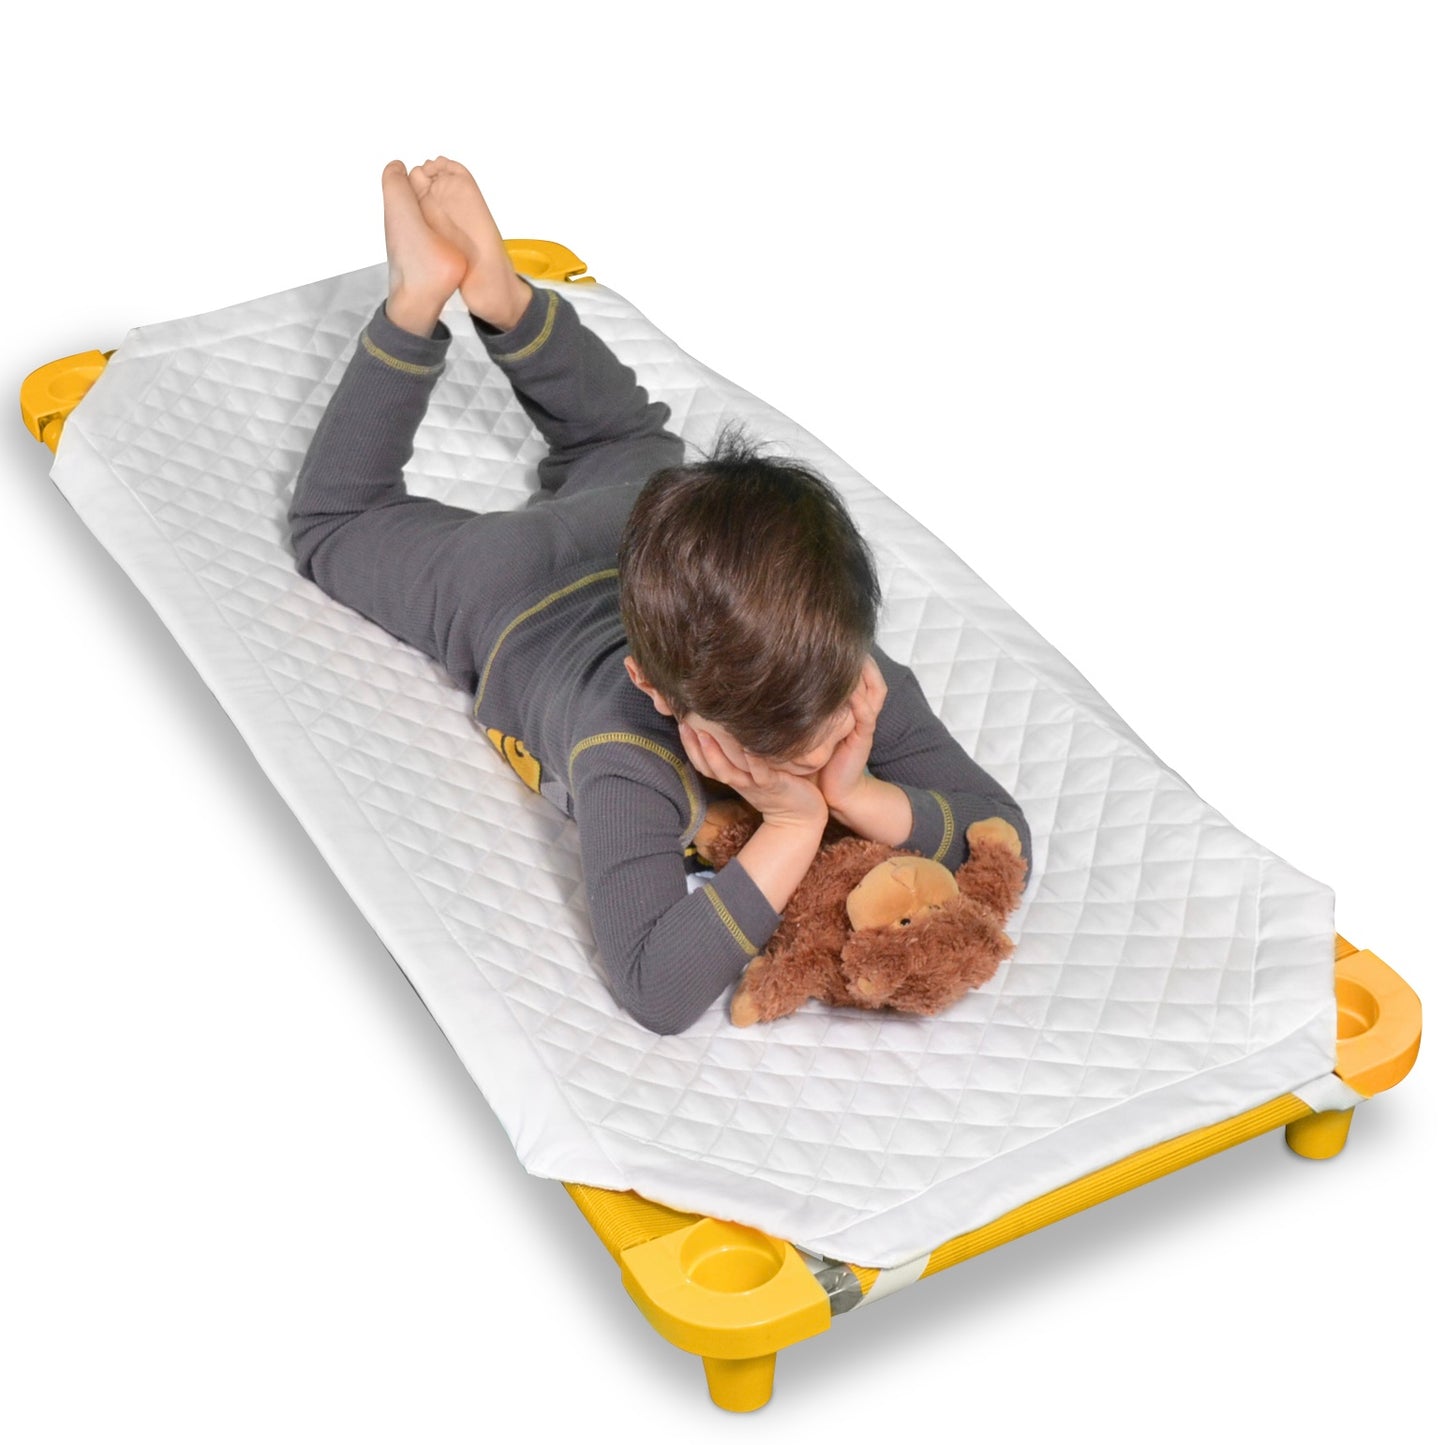 COTMAT Padded Cot Cover & Toddler Nap Mat for Daycare Cots